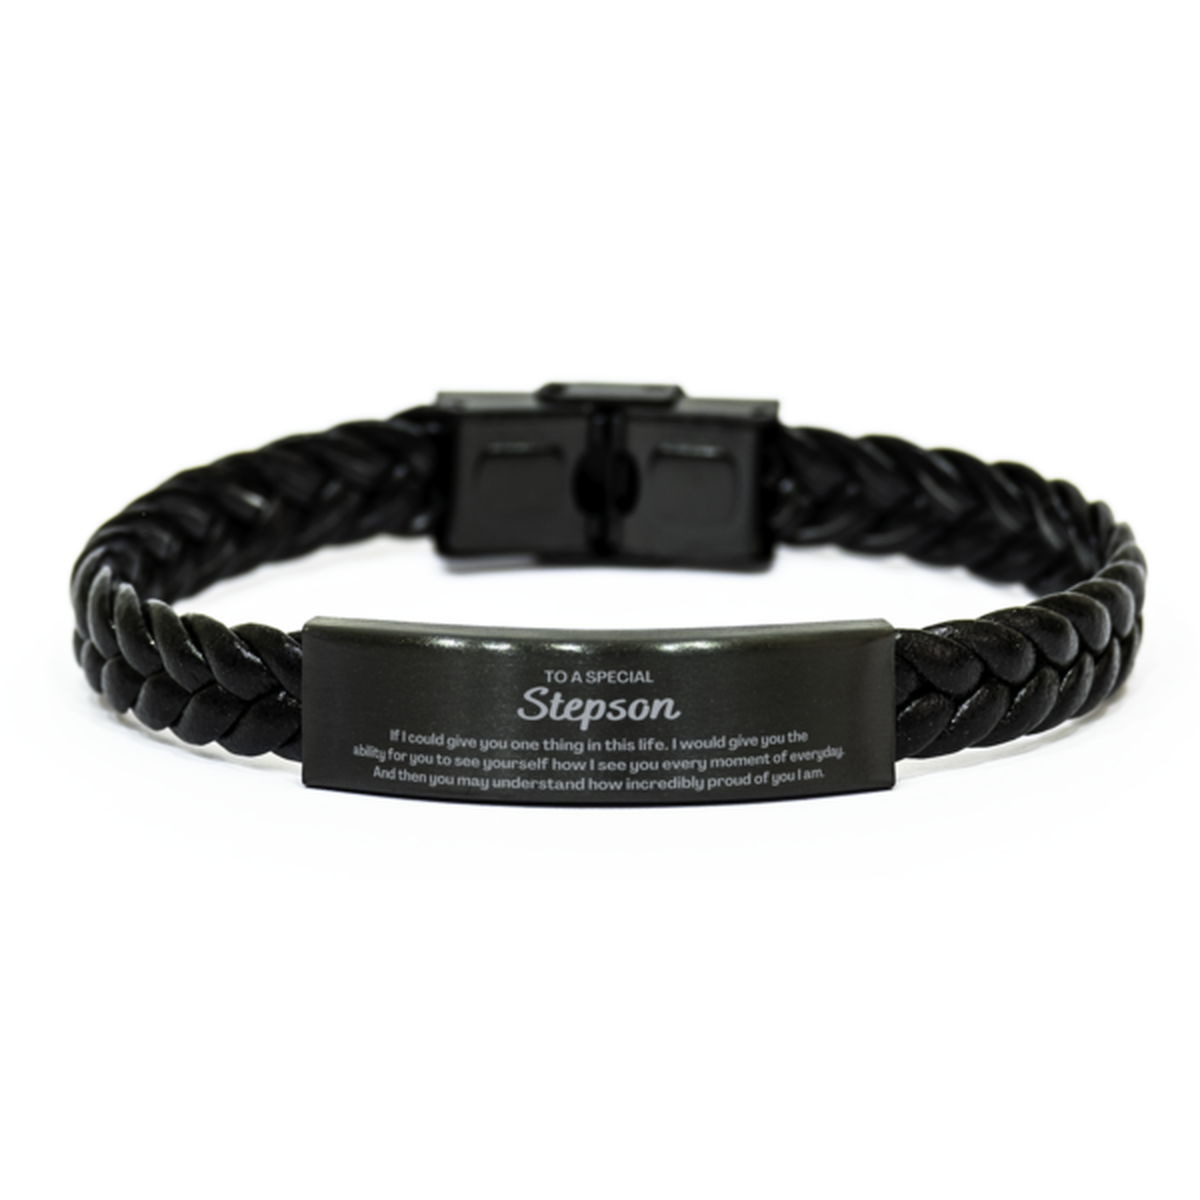 To My Stepson Braided Leather Bracelet, Gifts For Stepson Engraved, Inspirational Gifts for Christmas Birthday, Epic Gifts for Stepson To A Special Stepson how incredibly proud of you I am